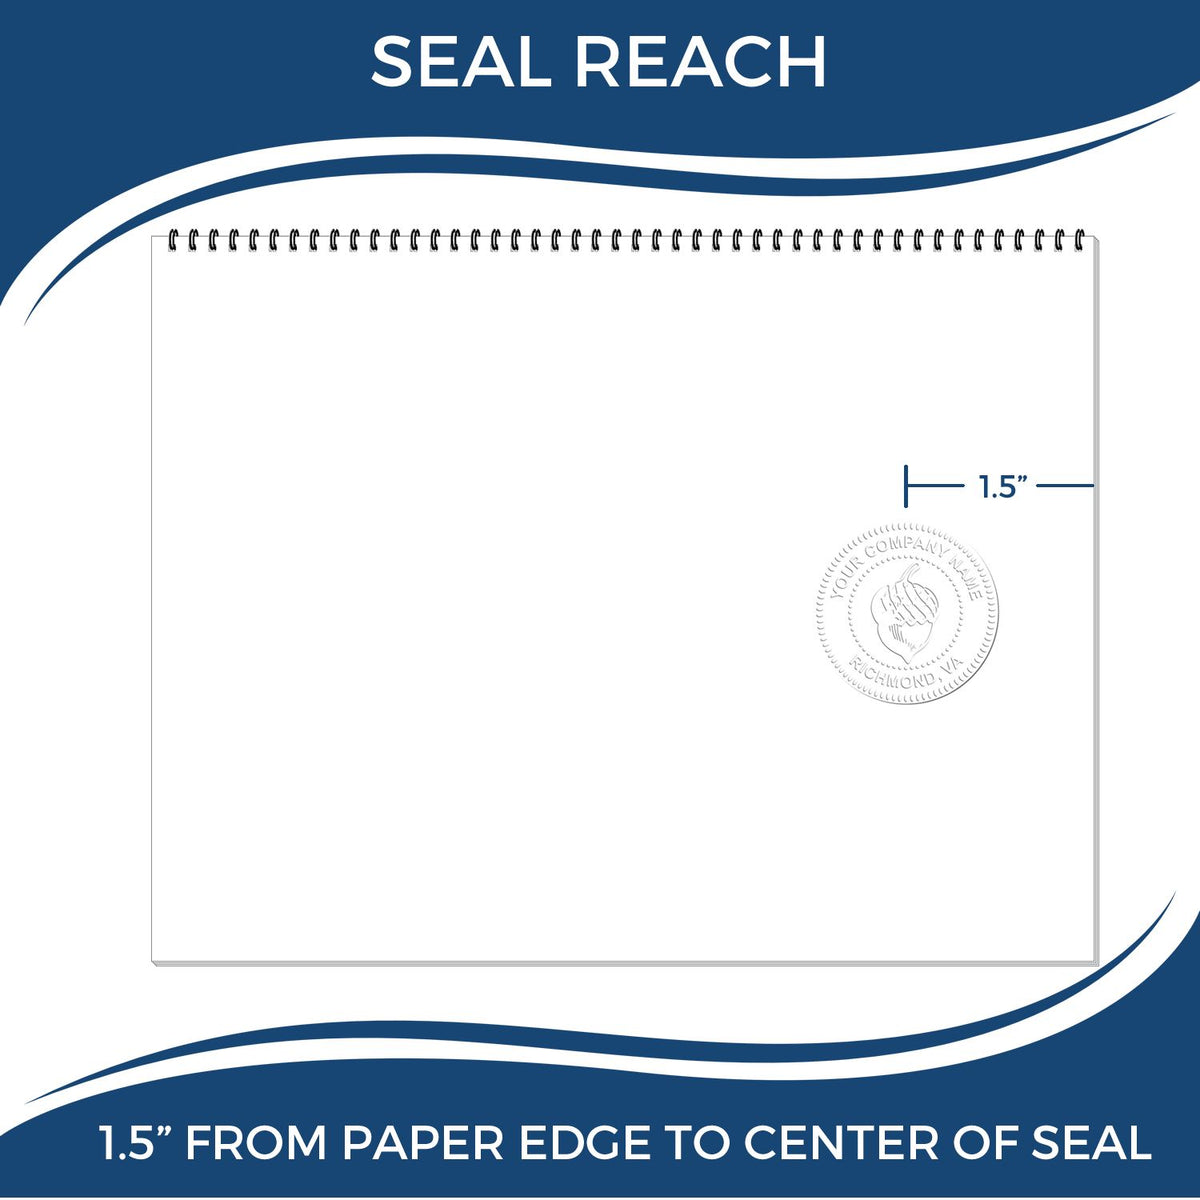 An infographic showing the seal reach which is represented by a ruler and a miniature seal image of the Hybrid Maine Architect Seal